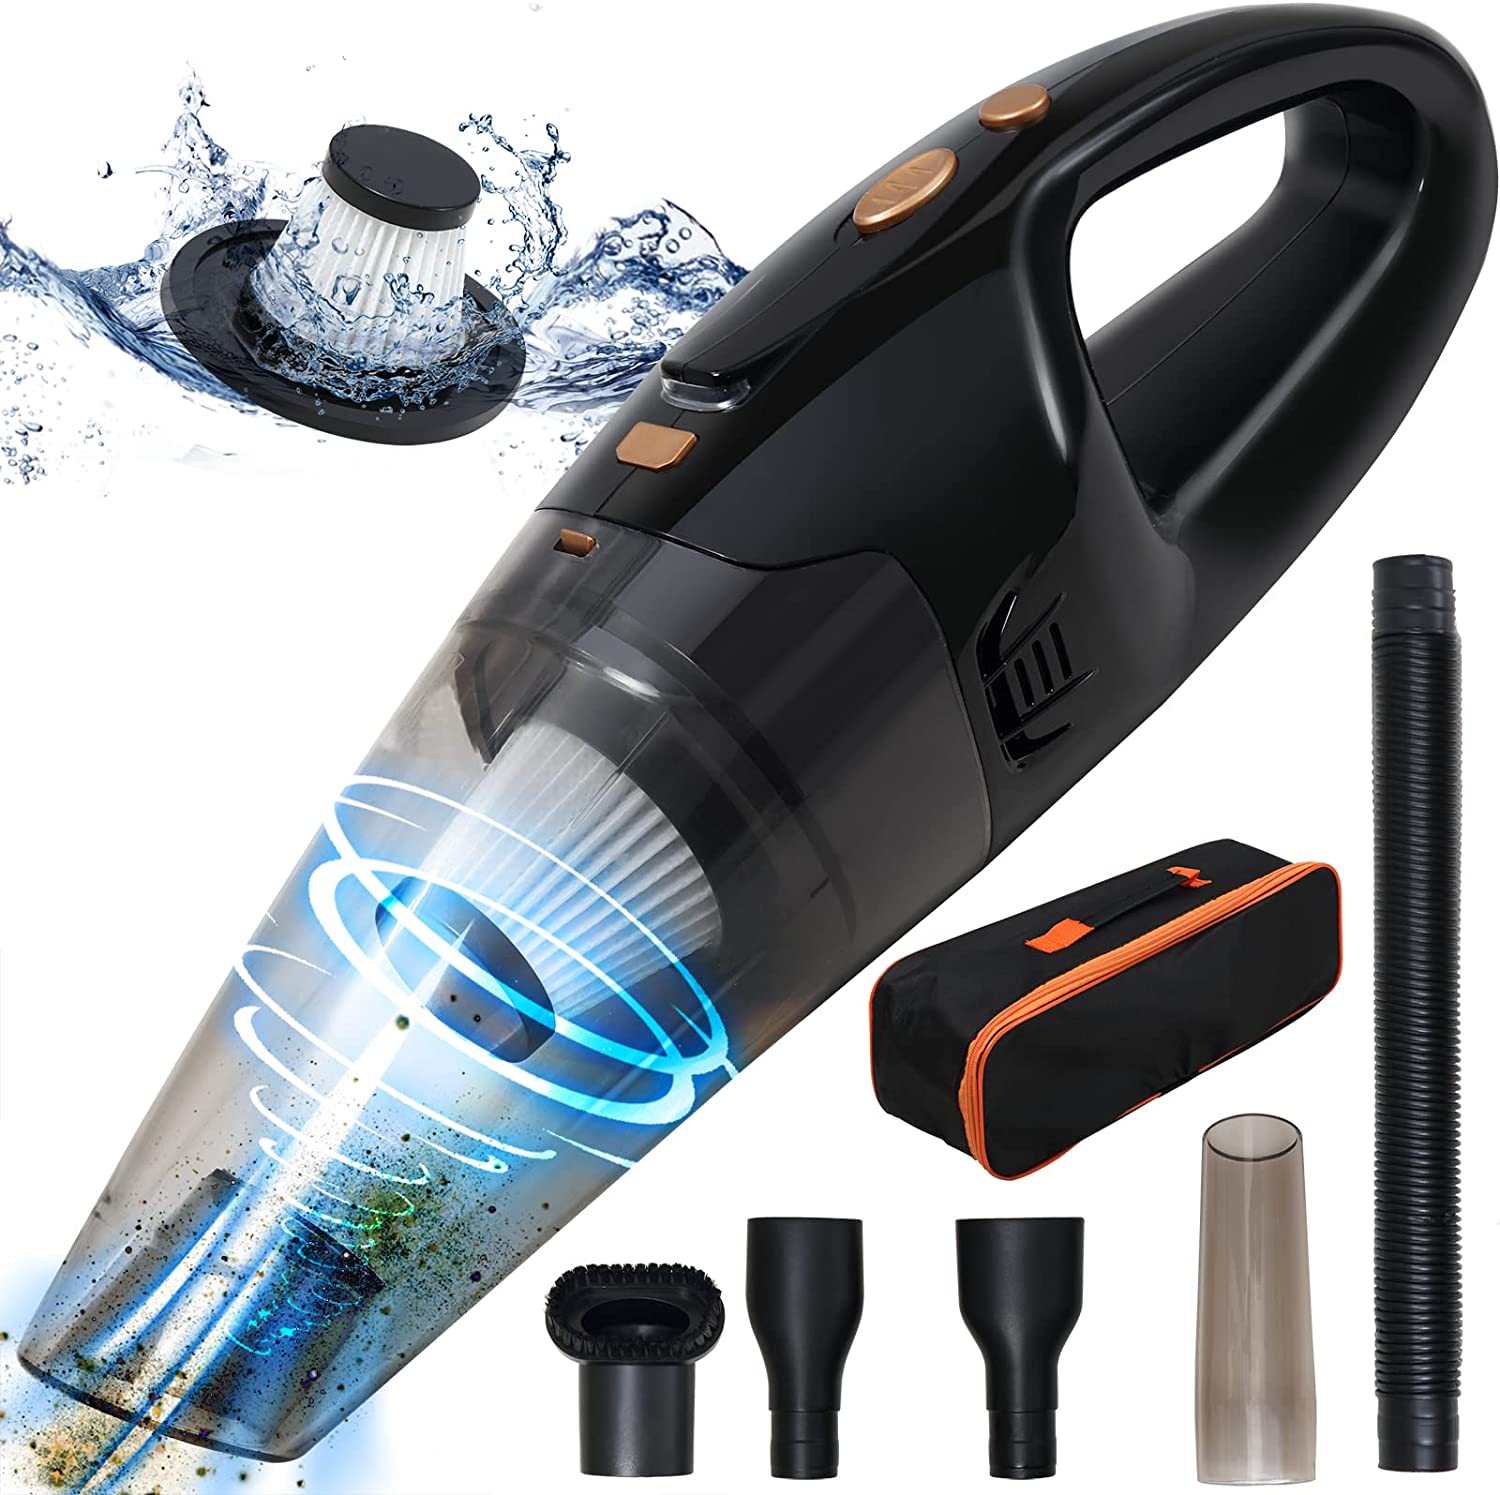 Portable Car Vacuum Cleaner with 8000 Pa Suction, Mini Handheld